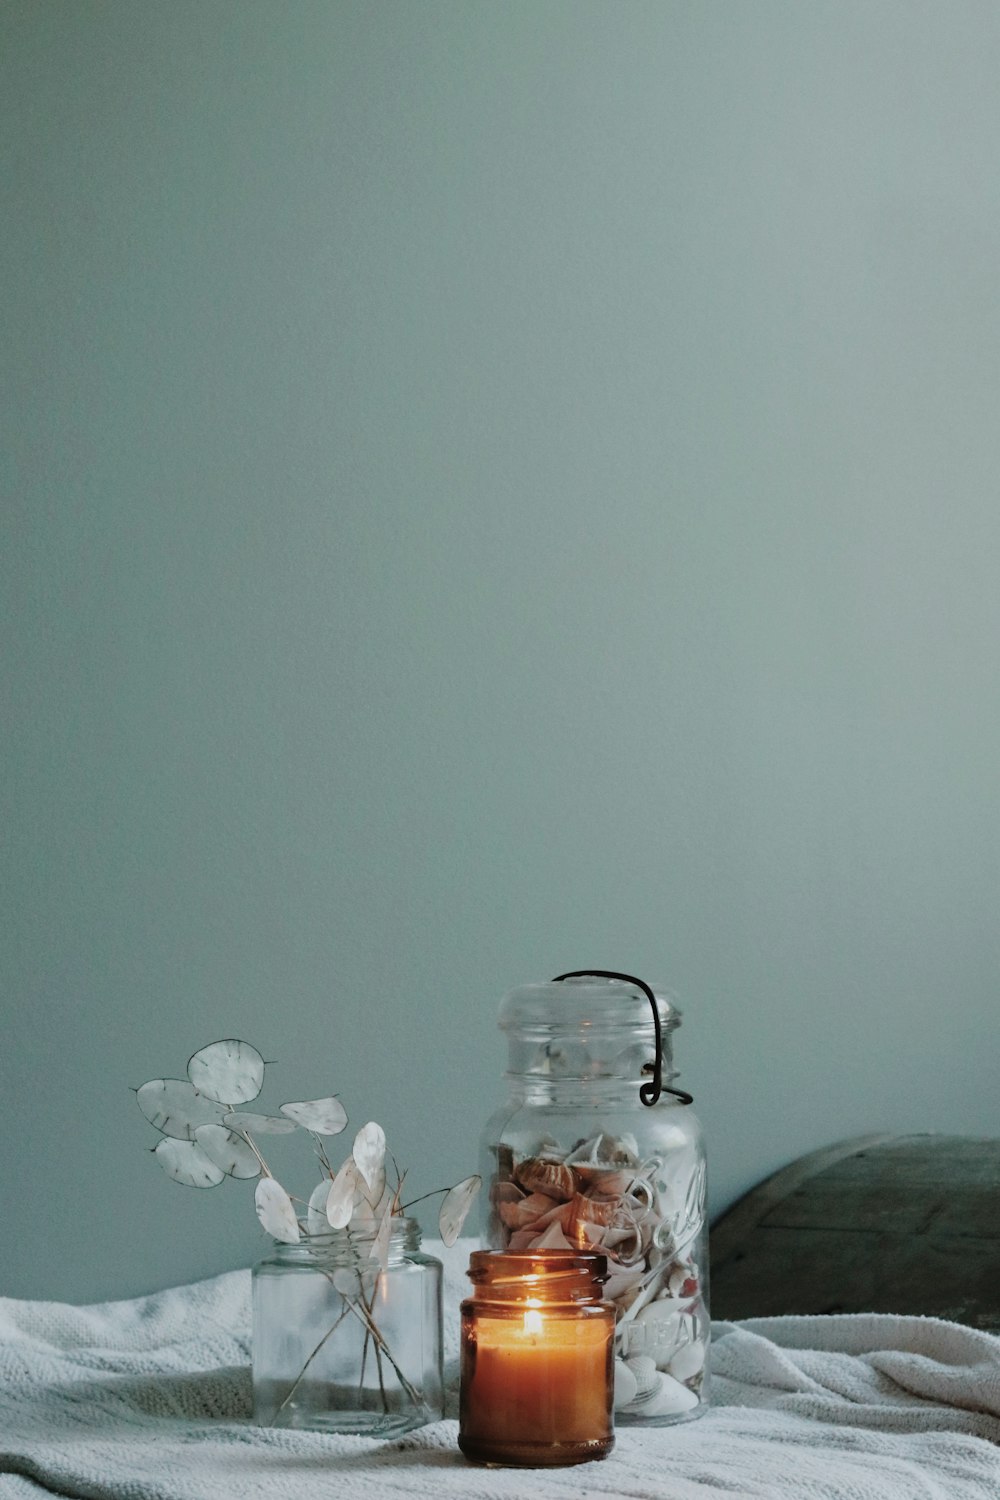 clear glass jar on white floral textile